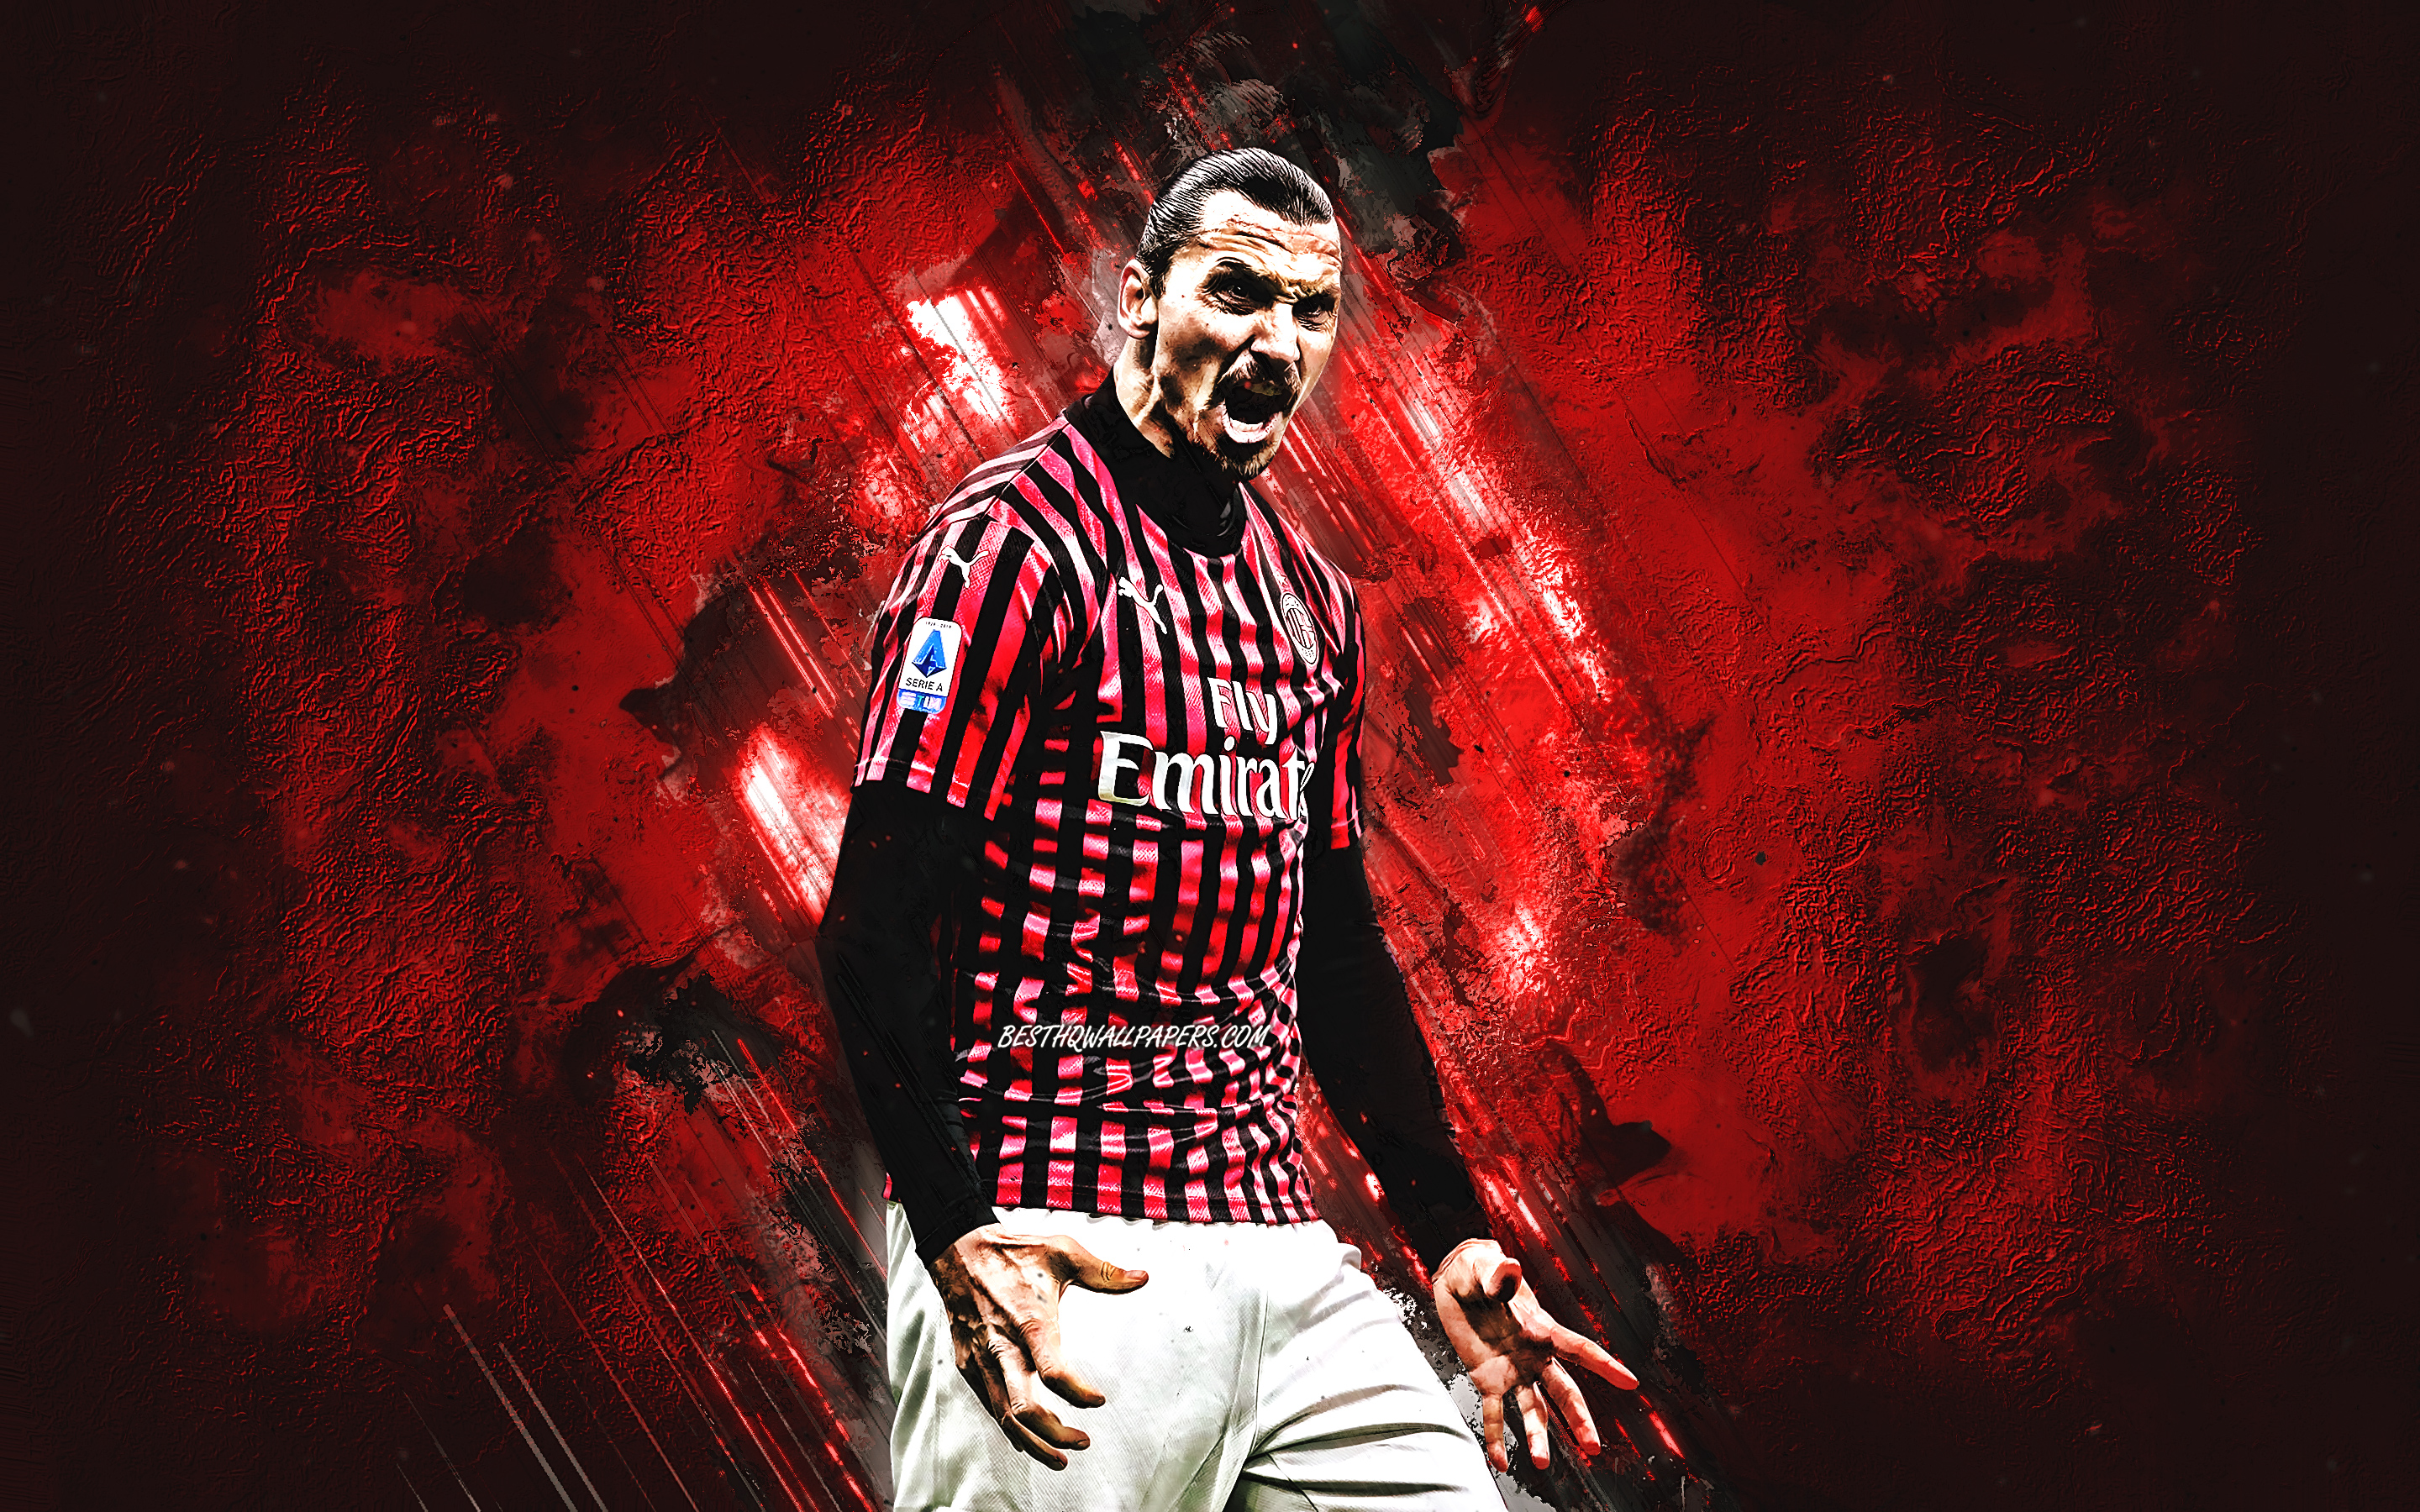 Download wallpaper Zlatan Ibrahimovic, Swedish soccer player, AC Milan, portrait, red stone background, creative art, Serie A, Italy, football for desktop with resolution 2880x1800. High Quality HD picture wallpaper